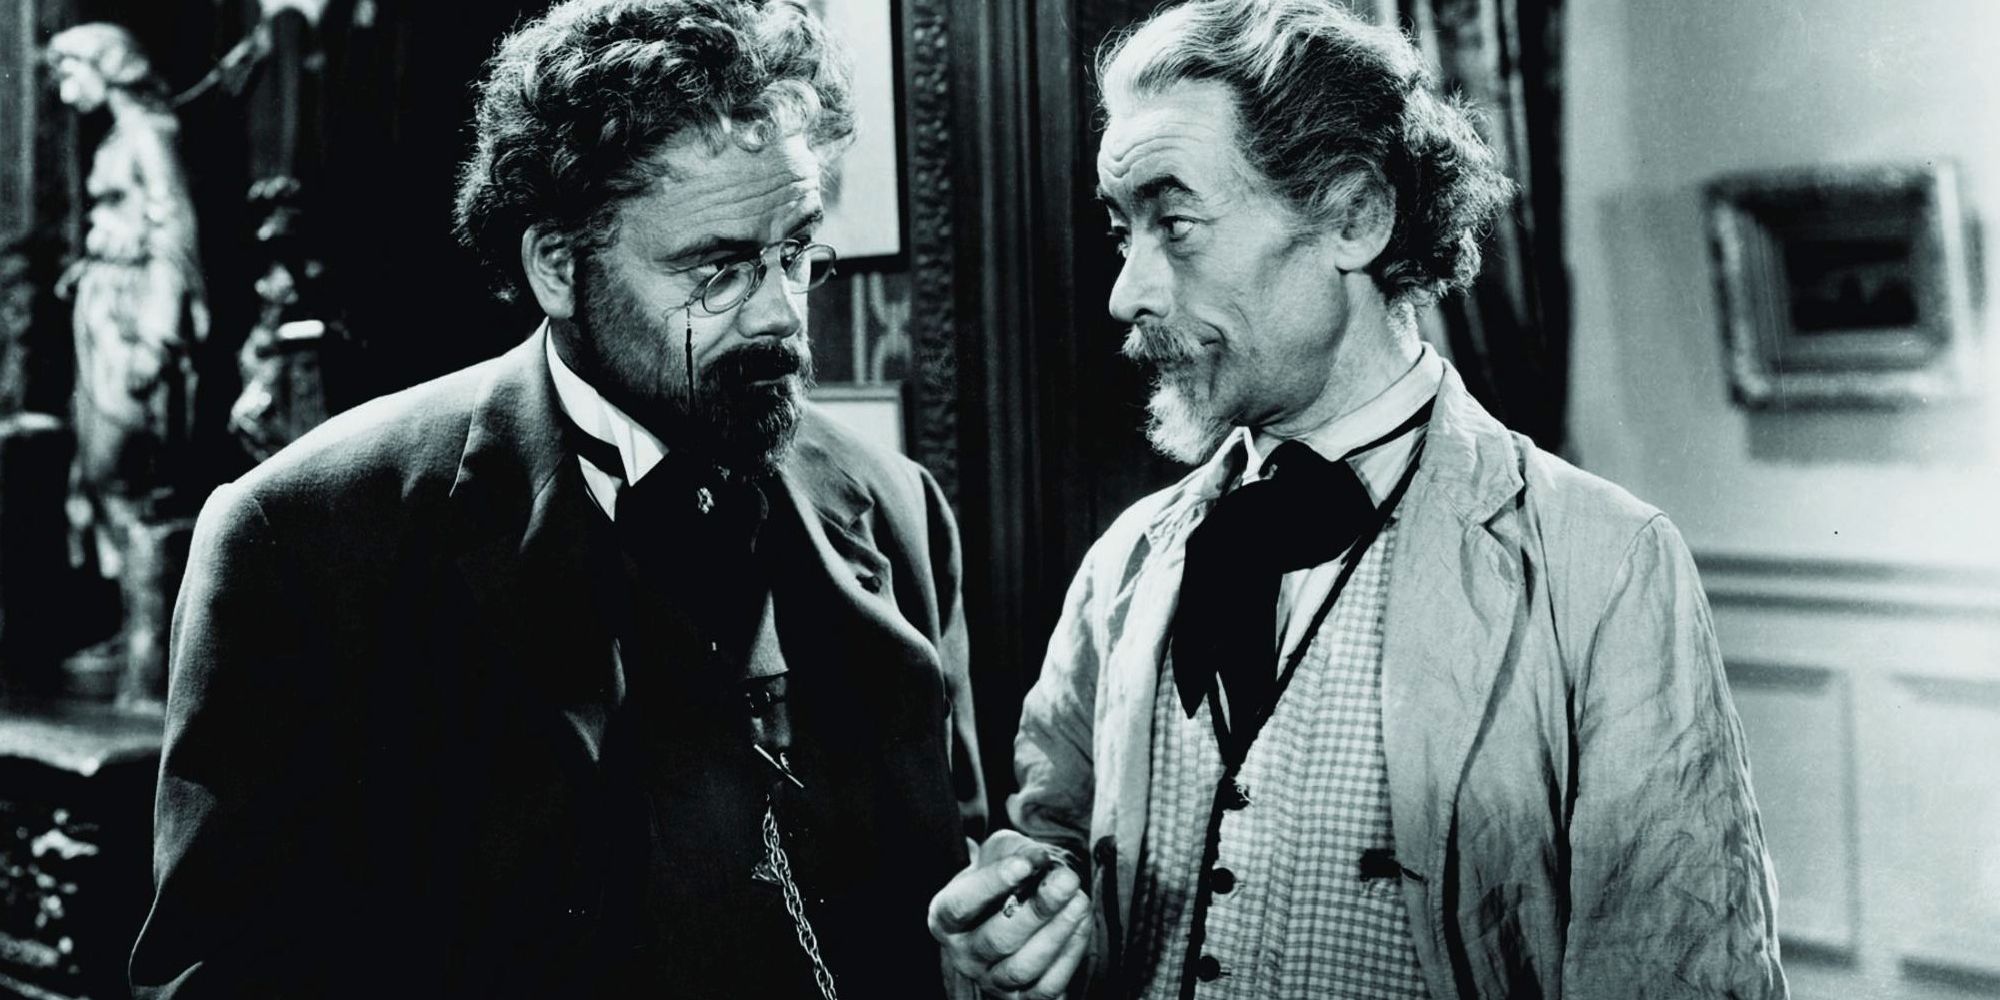 Two men talking in The Life of Emile Zola - 1937